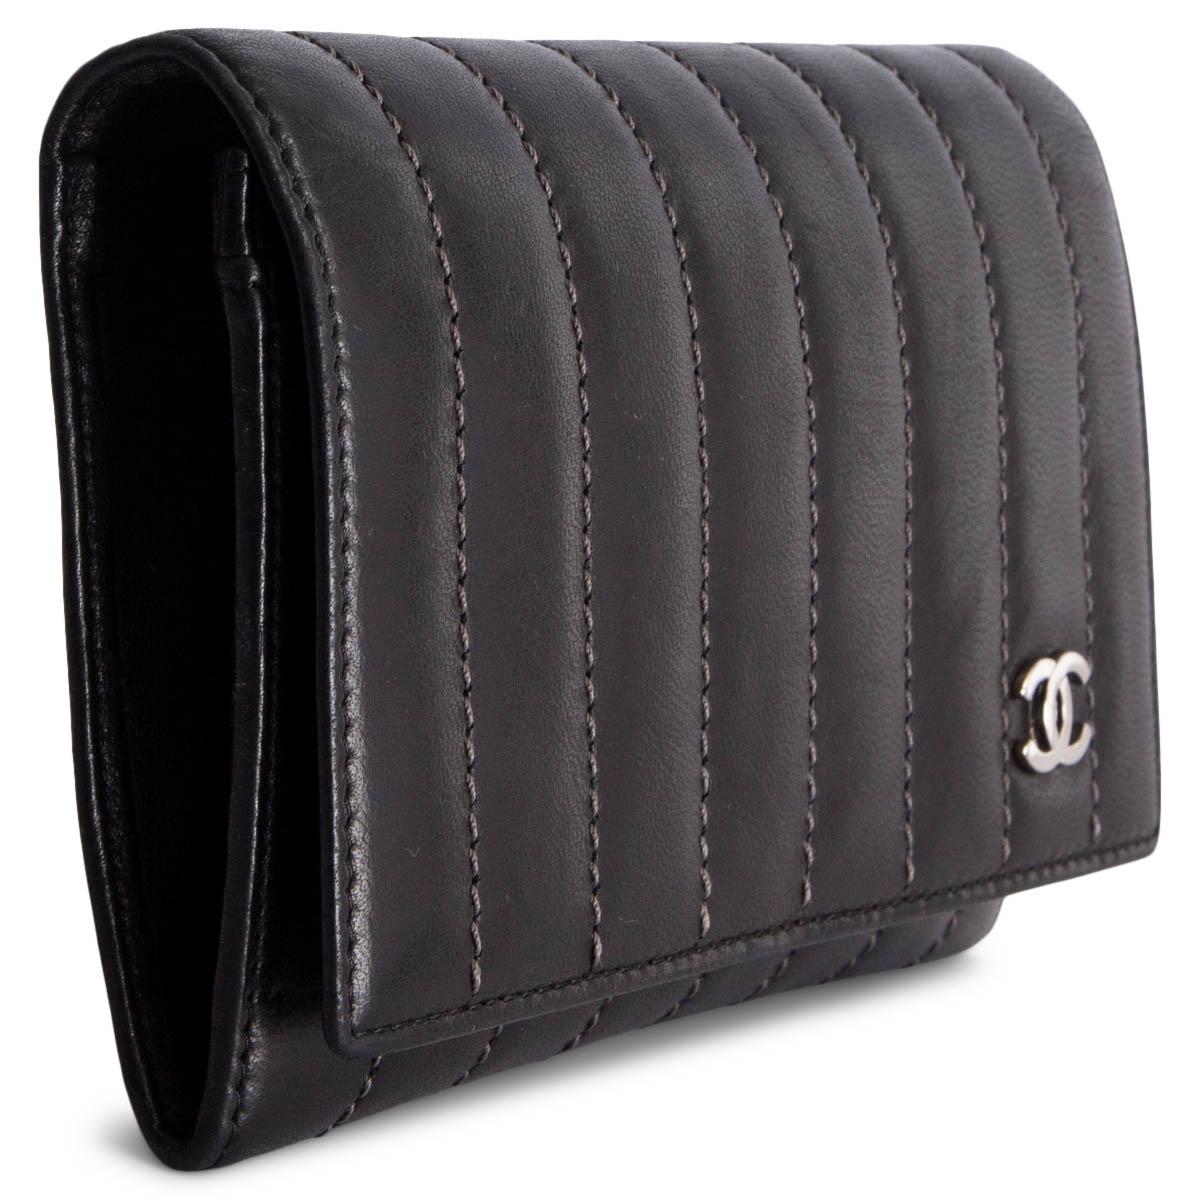 100% authentic Chanel wallet with stitched stripes in grey. Open with a push-button and is lined in black lambskin and logo nylon. The design is divided in two compartments with 3 credit card slots and a zipped coin pocket in the middle. Has been